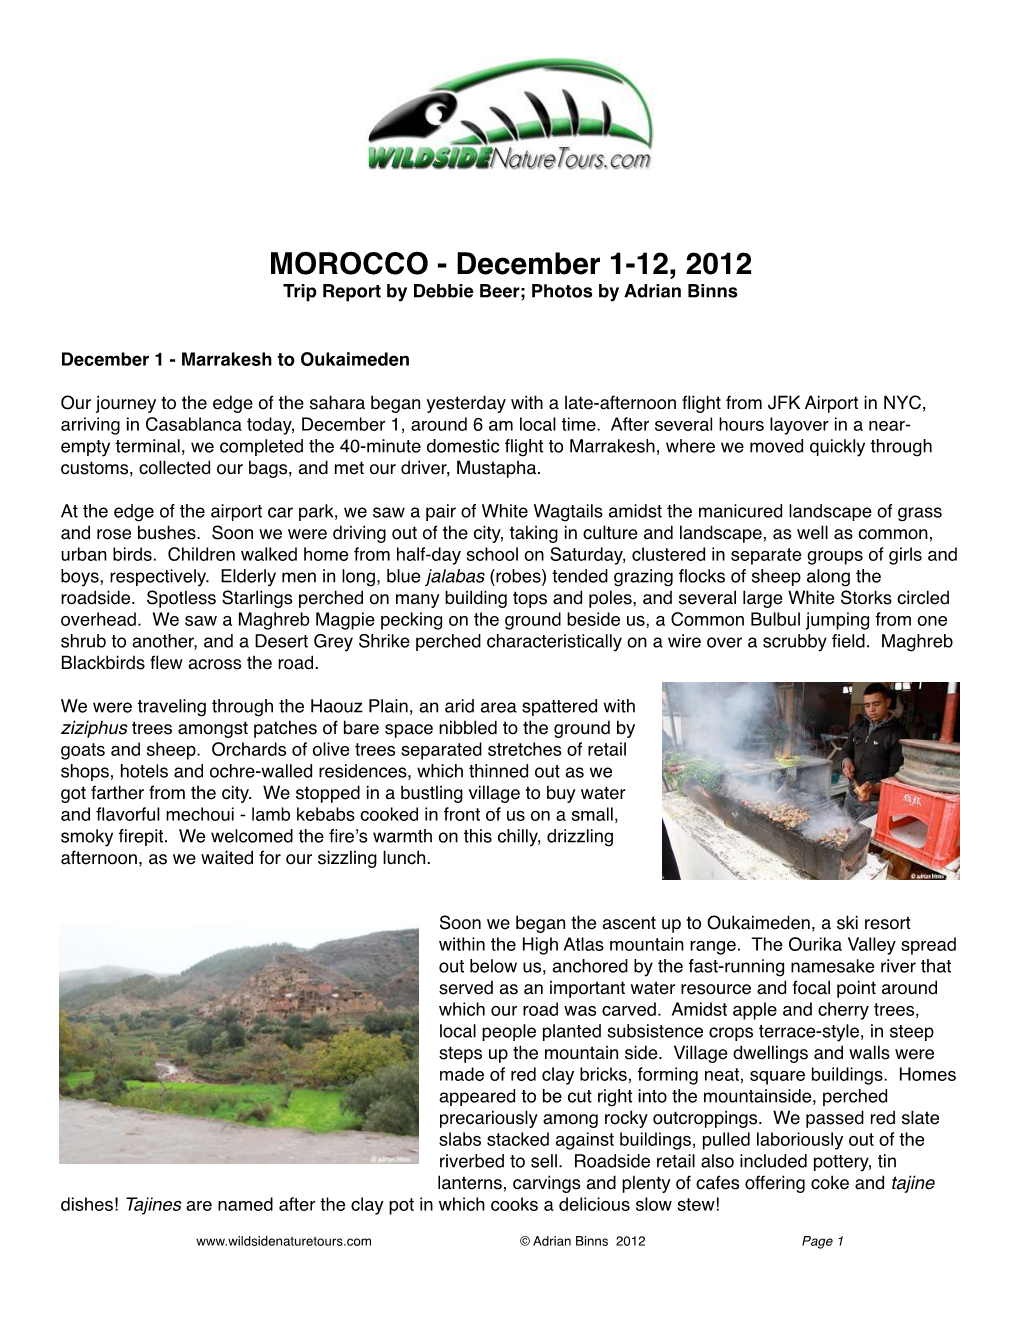 2012 Trip Report MOROCCO Southern